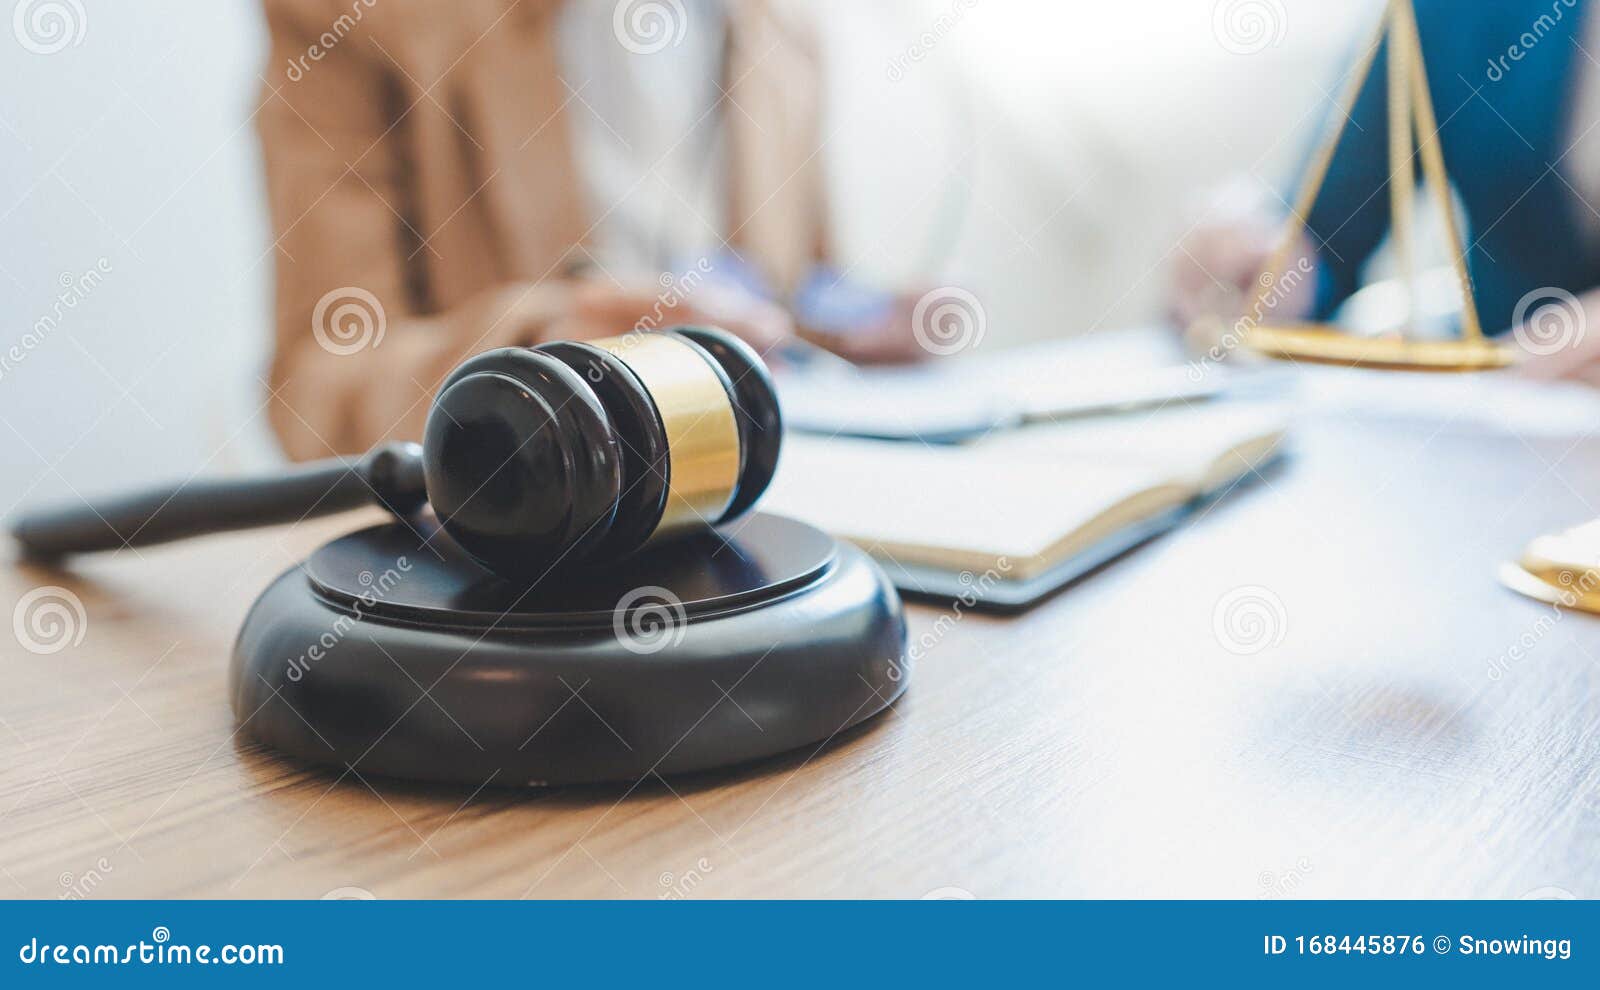 lawyer lawsuit notary consultation or discussing negotiation legal case with document contract women entrepreneurs in the office